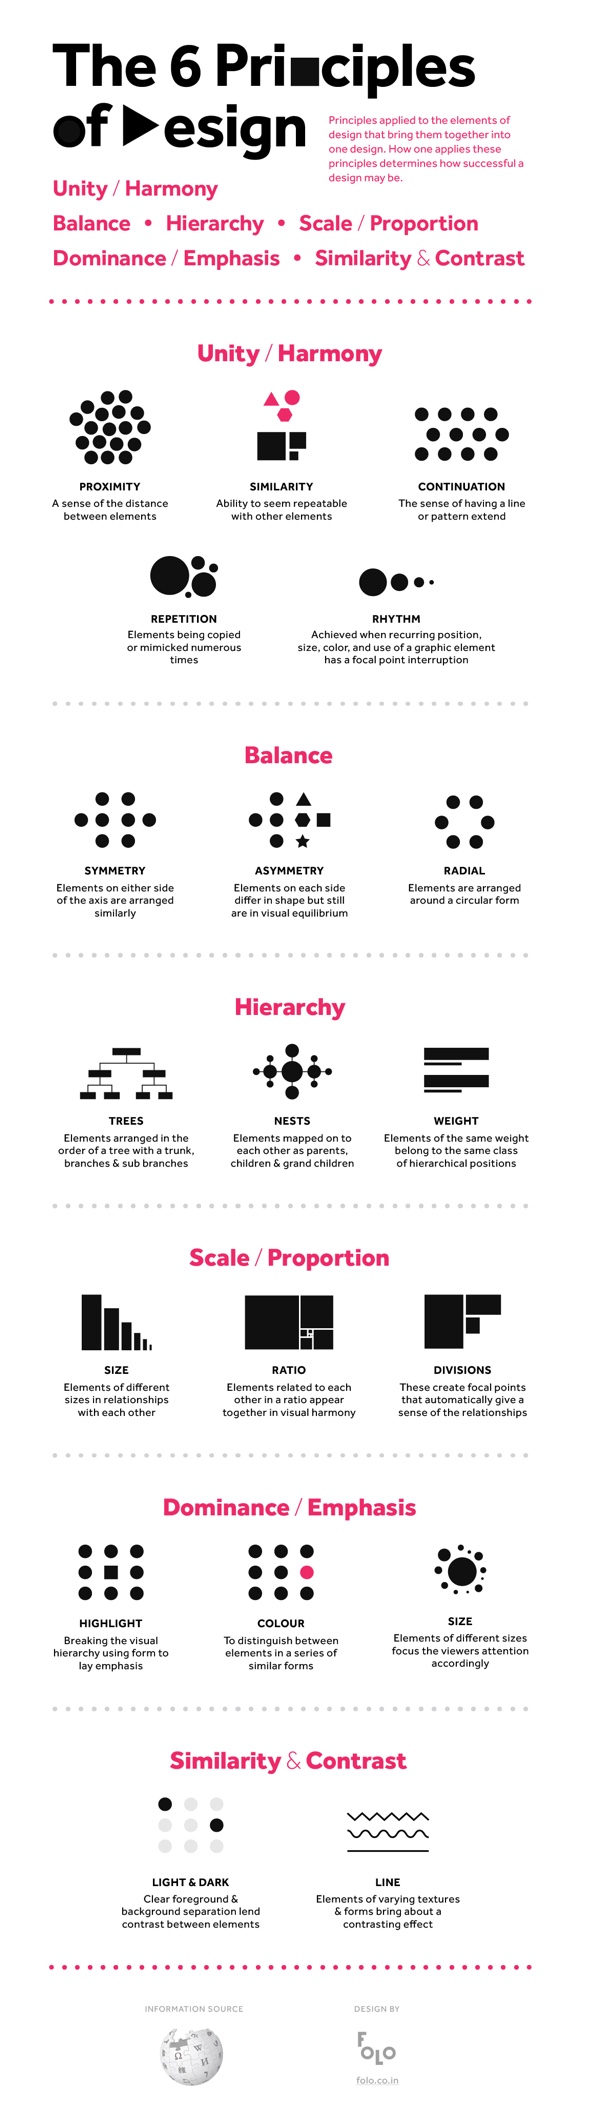 The 6 Principles of Design infographic